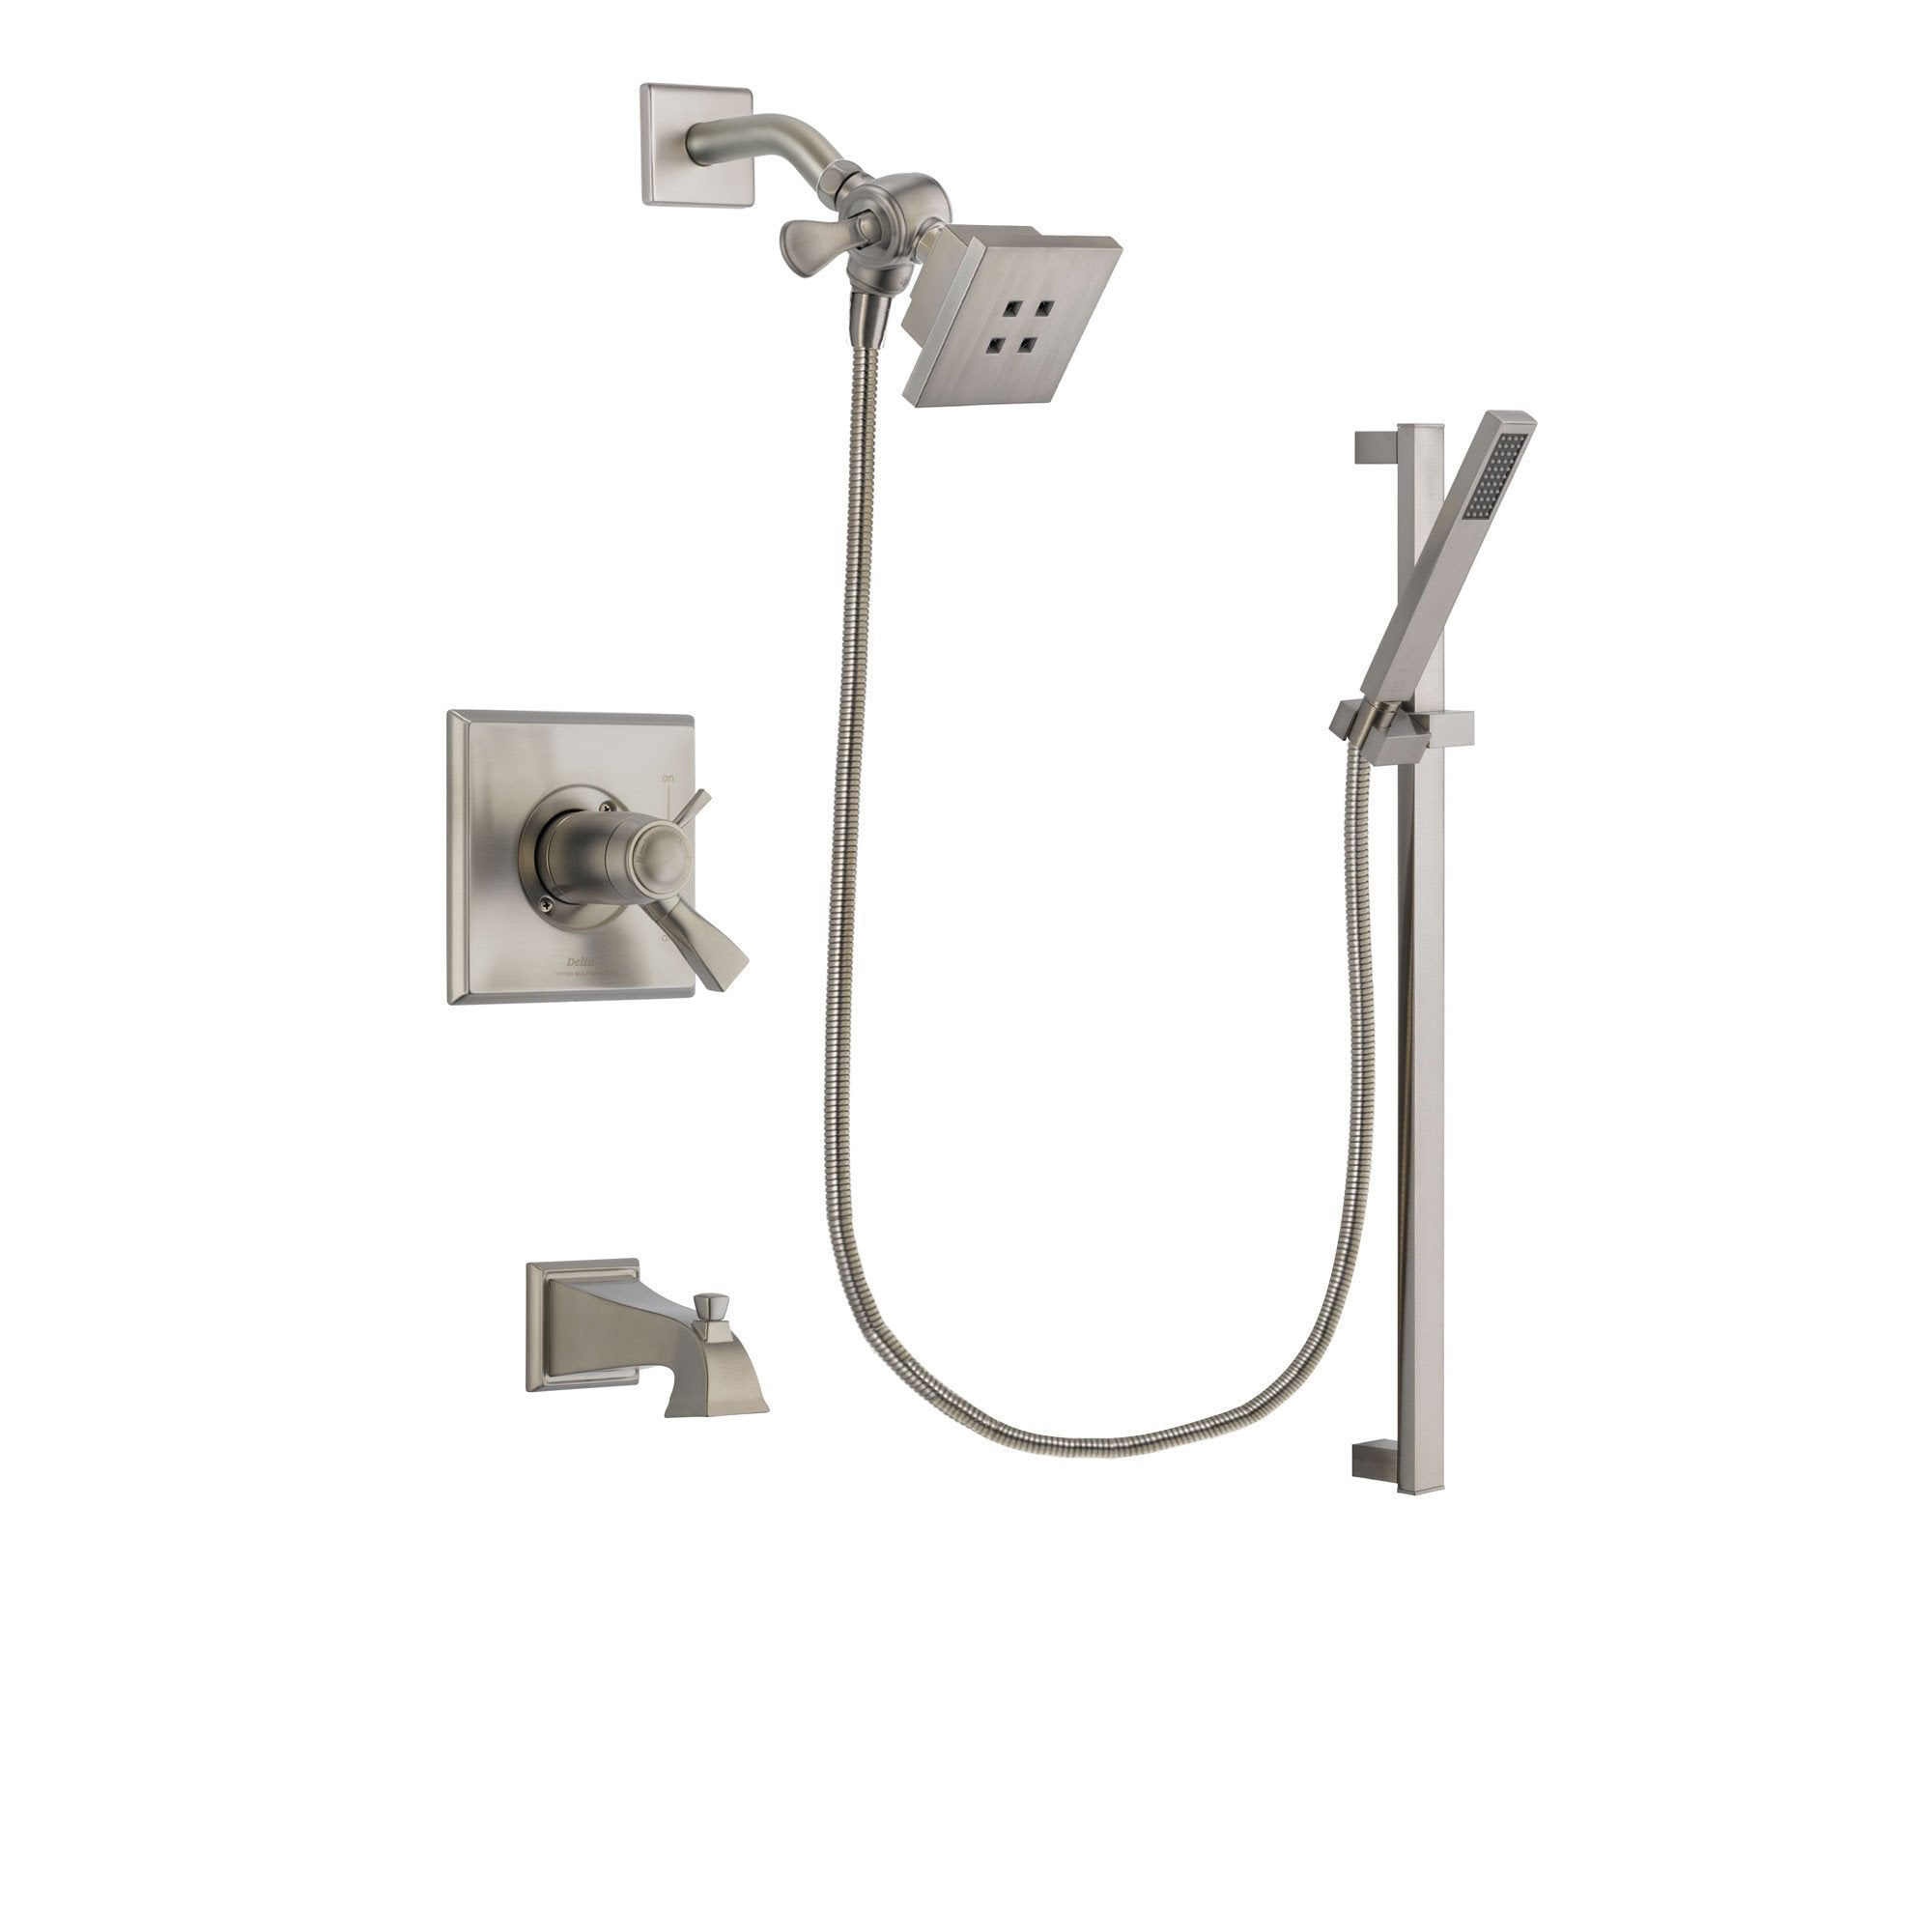 Delta Dryden Stainless Steel Finish Thermostatic Tub and Shower Faucet System Package with Square Showerhead and Modern Personal Hand Shower with Slide Bar Includes Rough-in Valve and Tub Spout DSP2327V